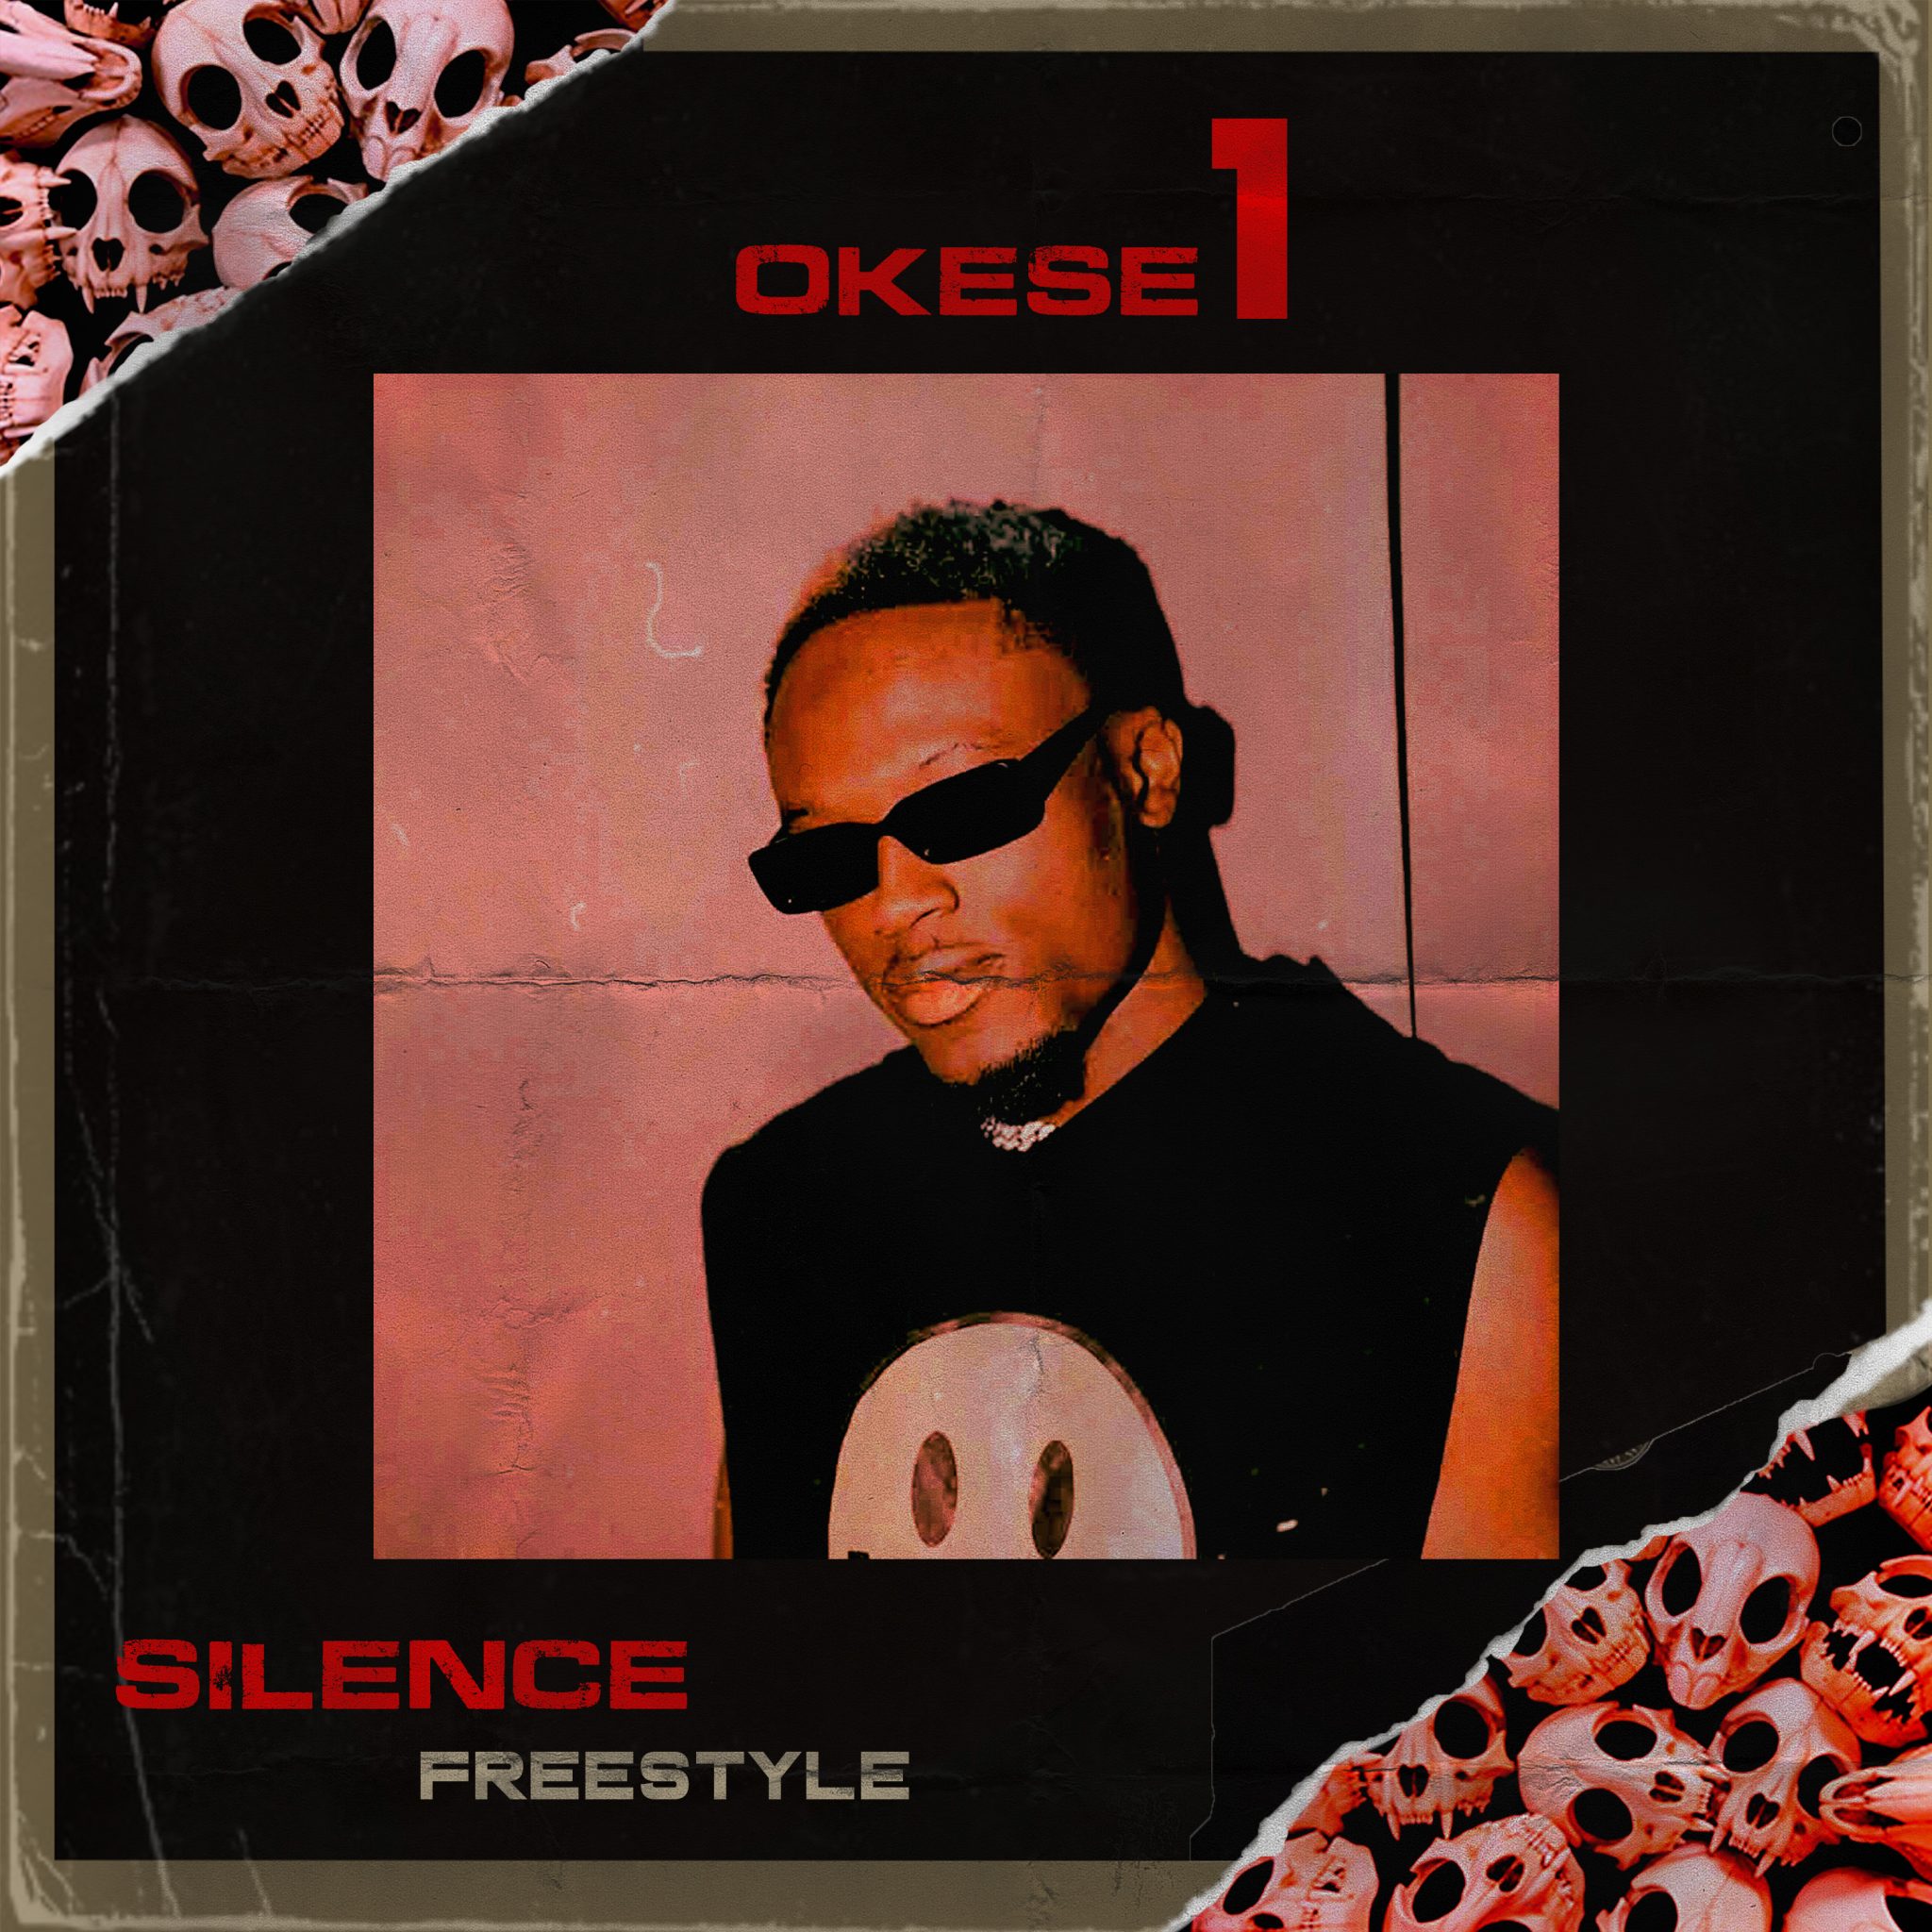 Download MP3: Okese1 – Silence (Freestyle) | Ndwompafie.net